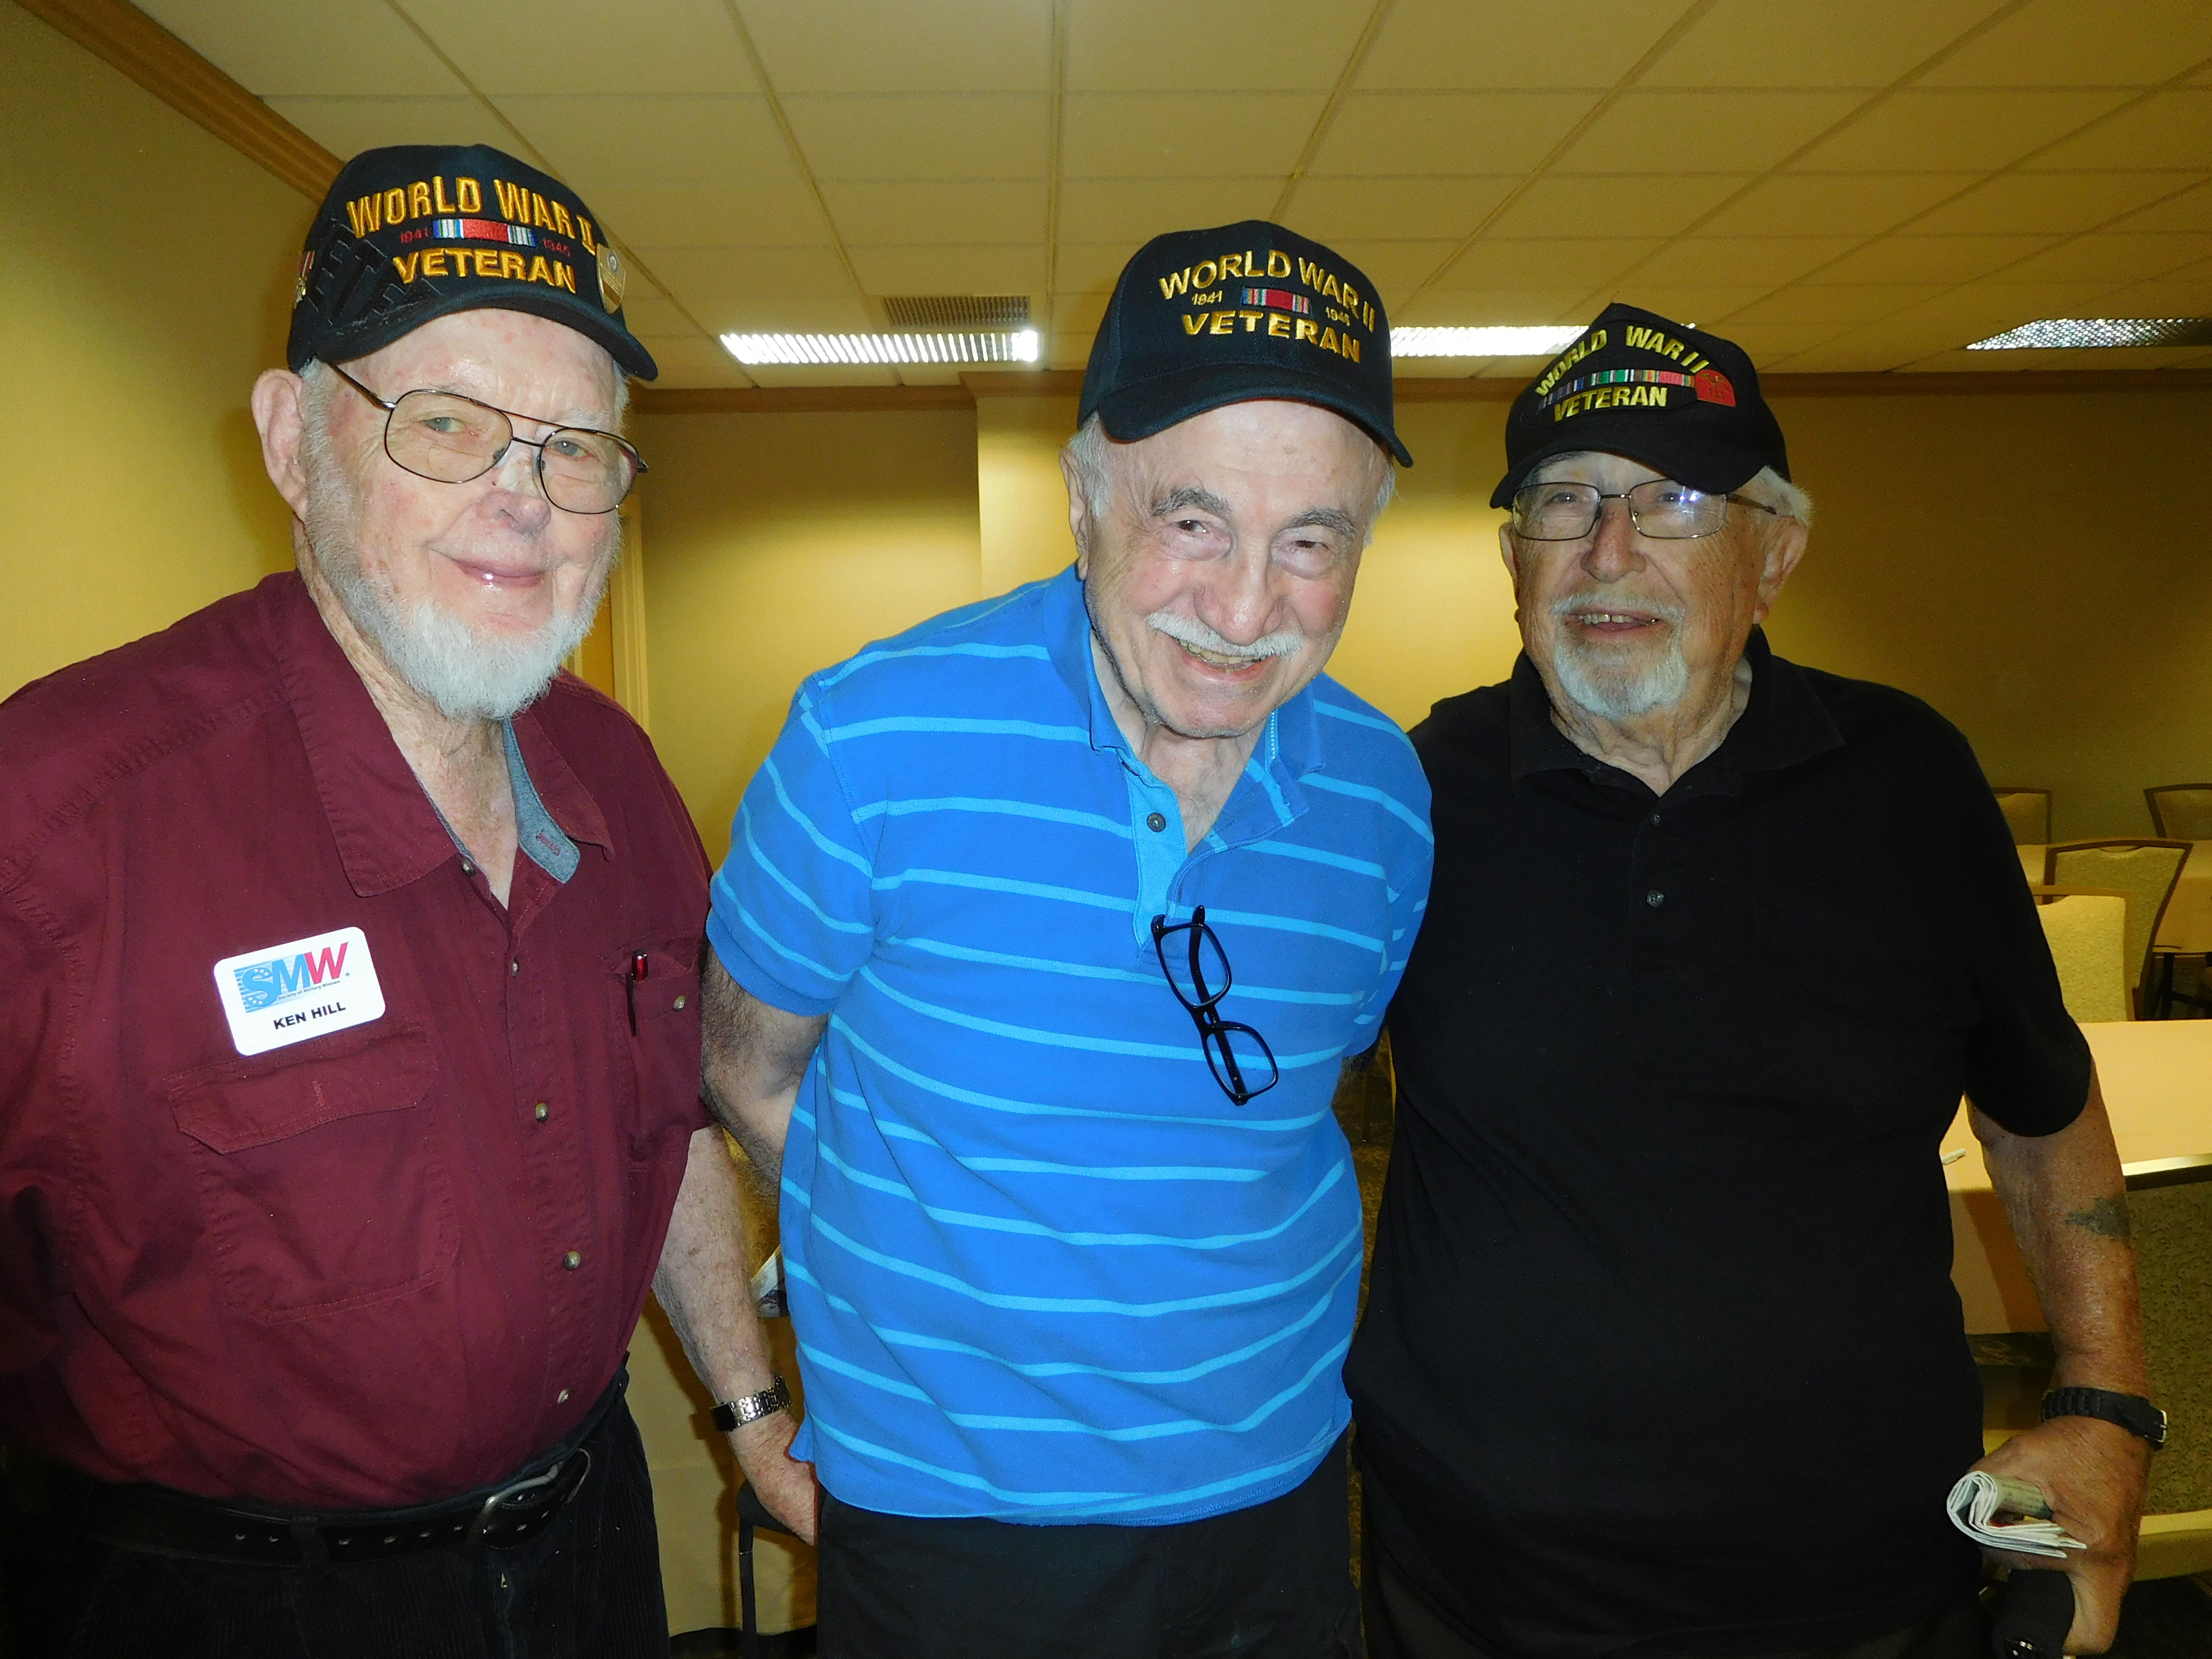 Some of our WWII Heroes